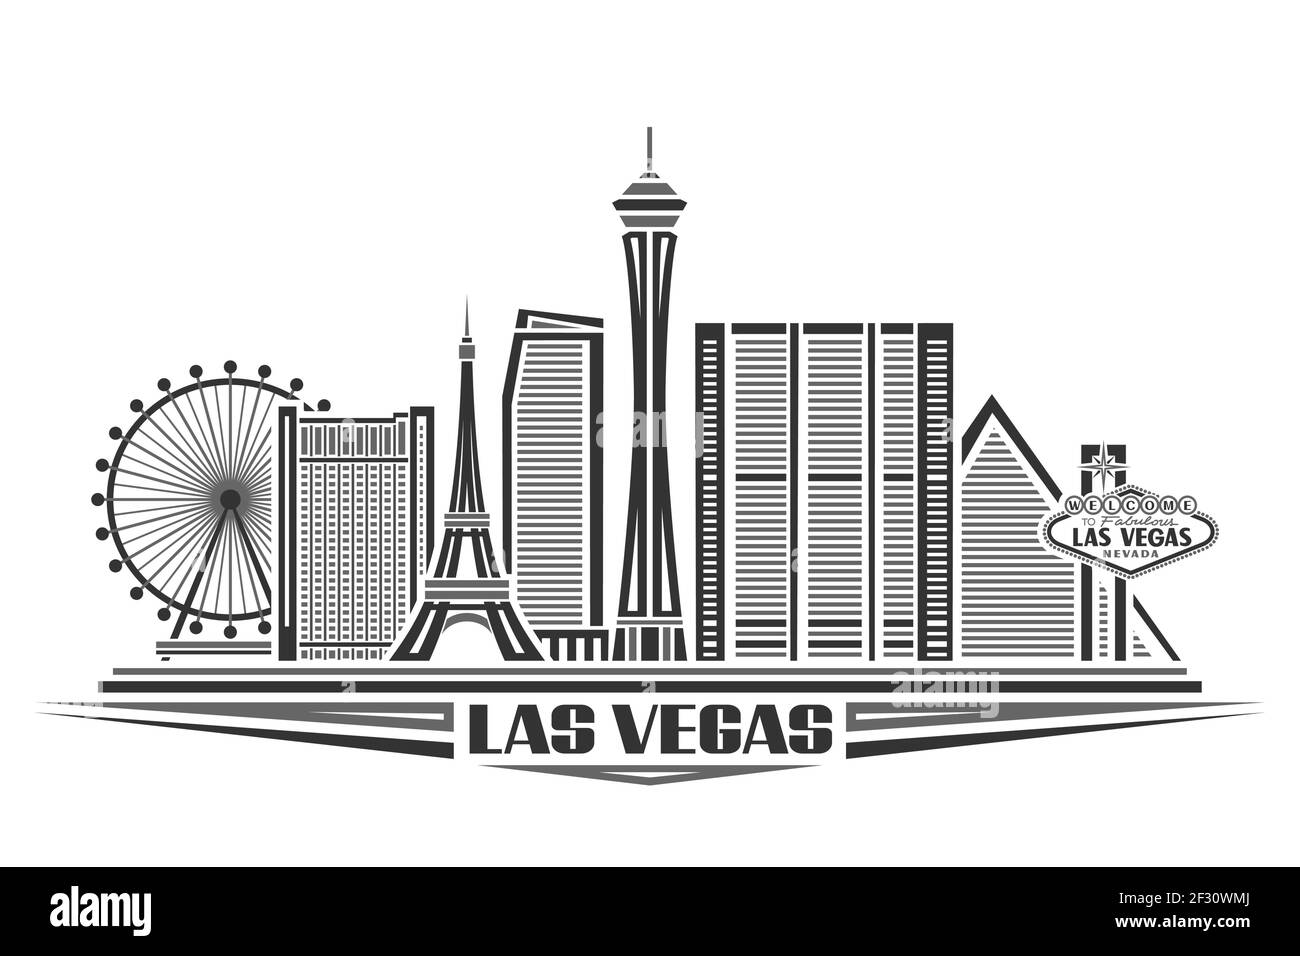 Vector illustration of Las Vegas, monochrome poster with simple design buildings and outline landmarks, urban concept with modern city scape and decor Stock Vector